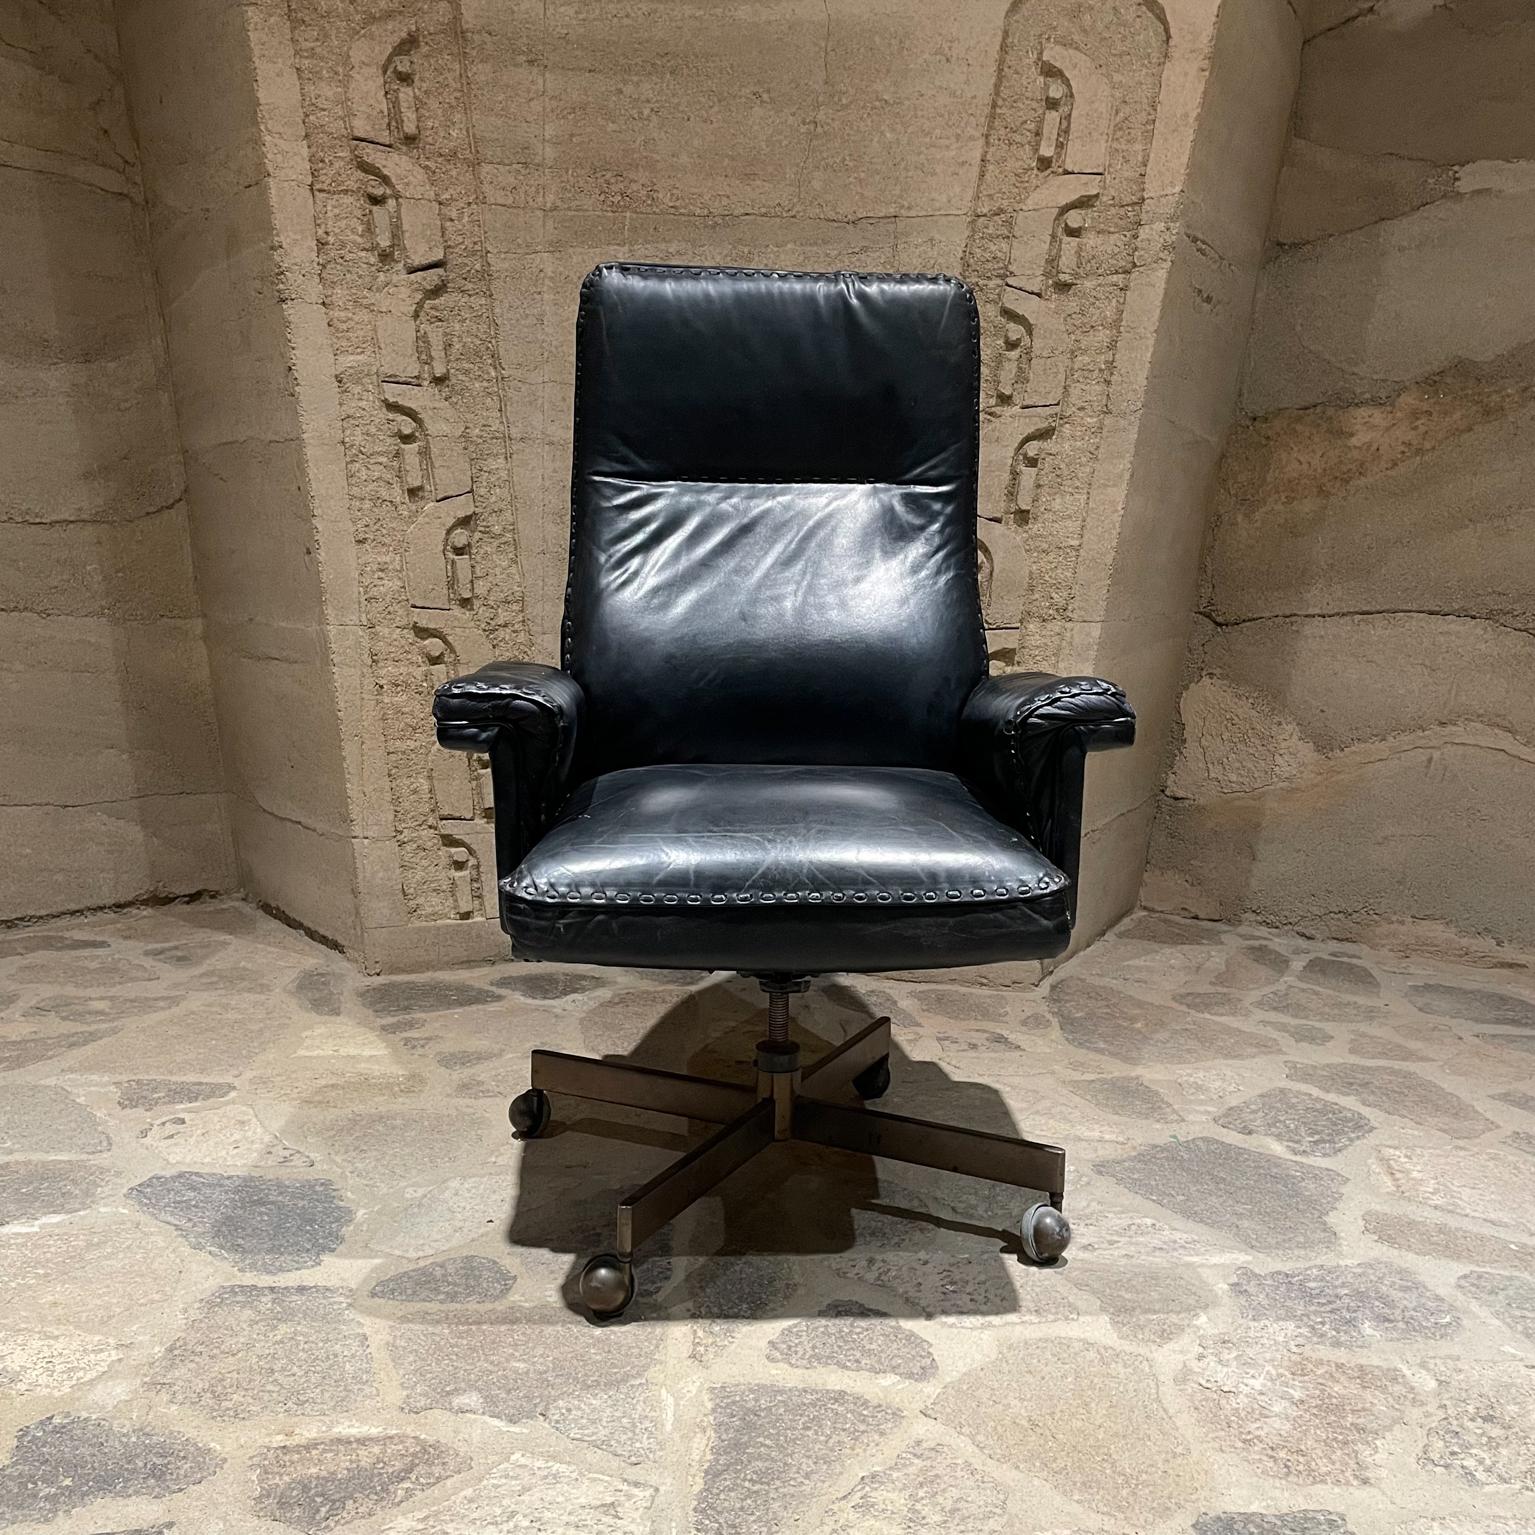 Tall Executive Chair
Sensational Executive Chair 1970s black leather swivel armchair in whipstitch De Sede DS 35
Robert Haussmann Switzerland
Base has been interchanged at some point.
46 tall x 30 w x 26 d, Seat 20 tall, Arm 26 h
Original